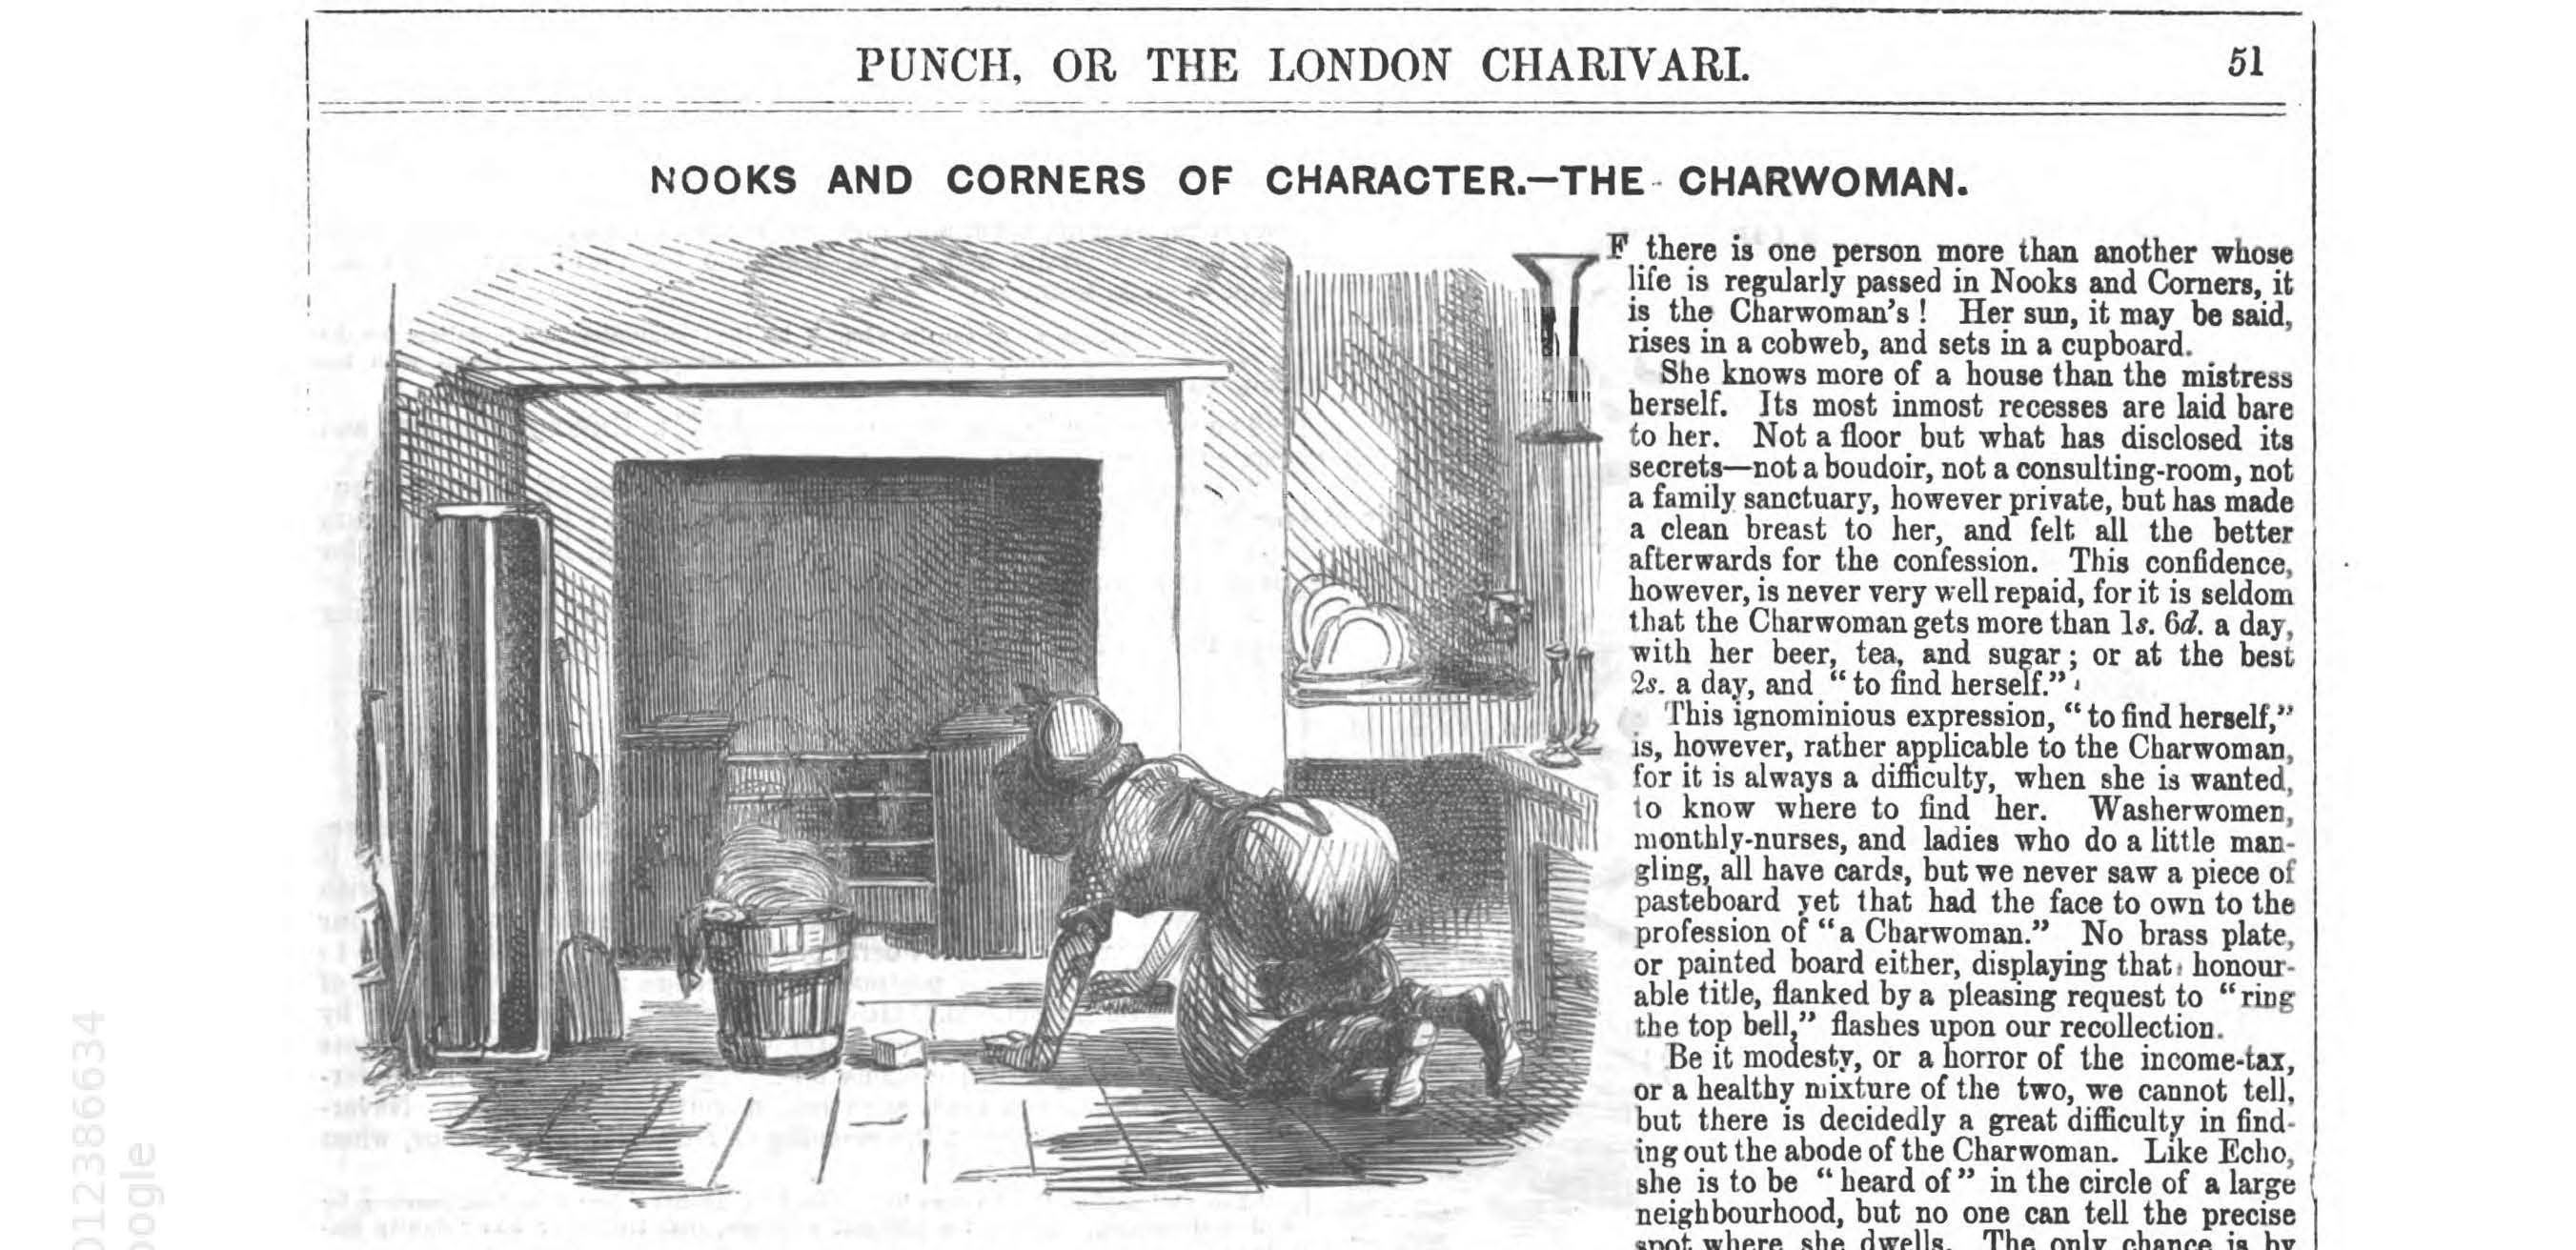 Line drawing of a charwoman on her hands and knees scrubbing the are in front of a fireplace.